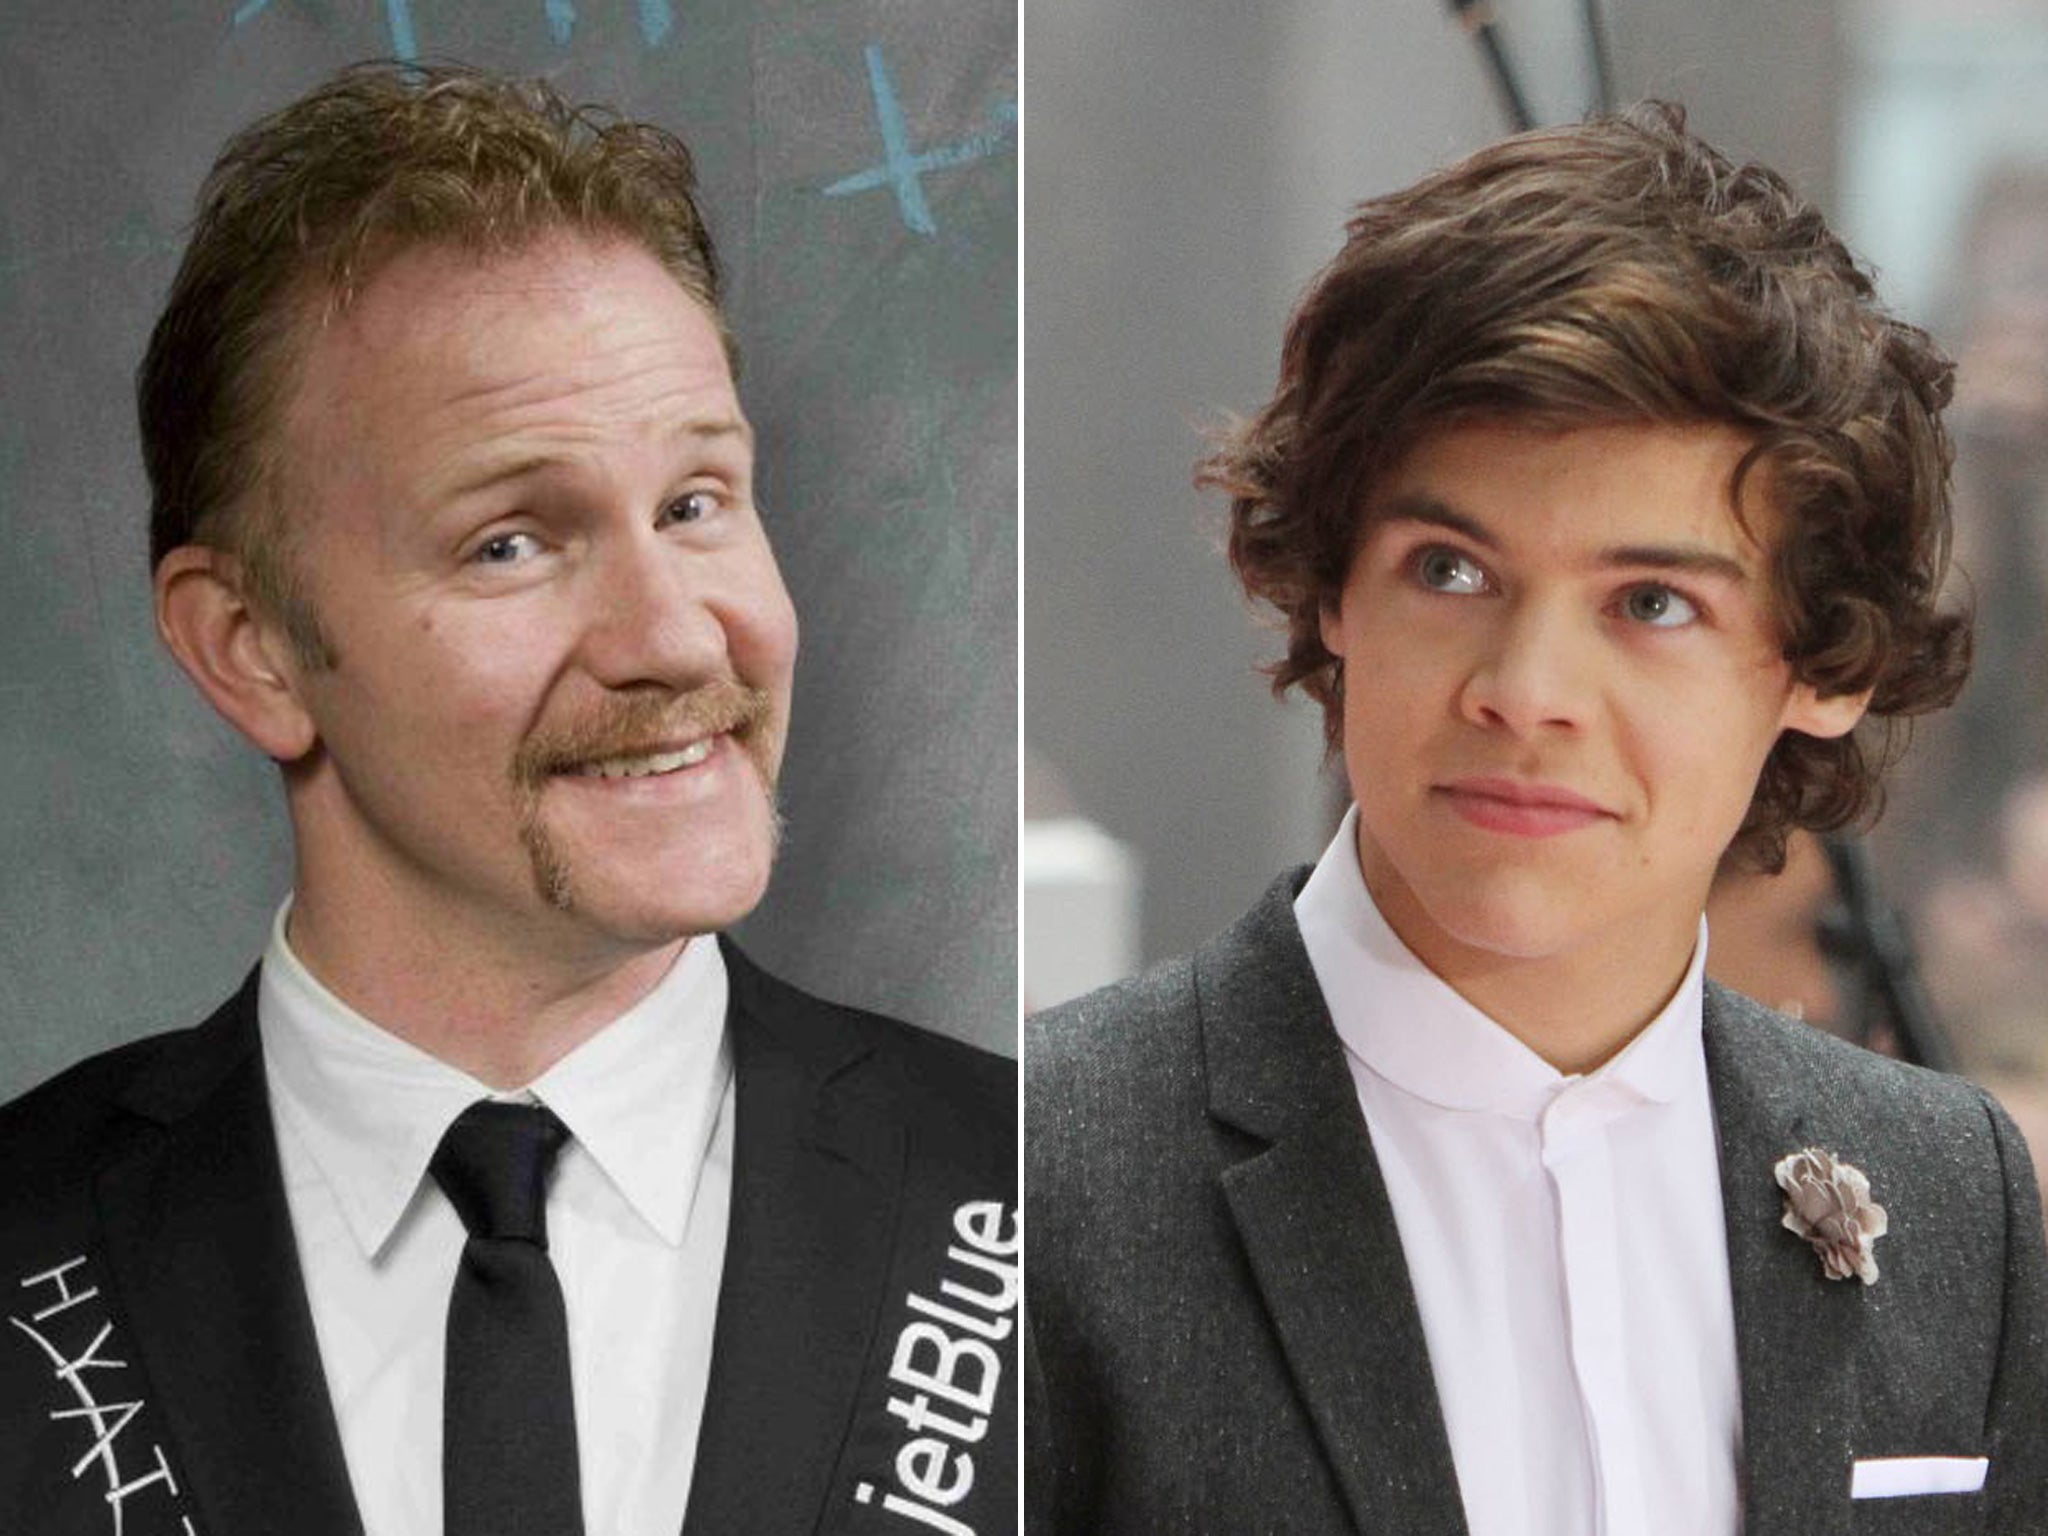 Morgan Spurlock (left) and One Direction's Harry Styles